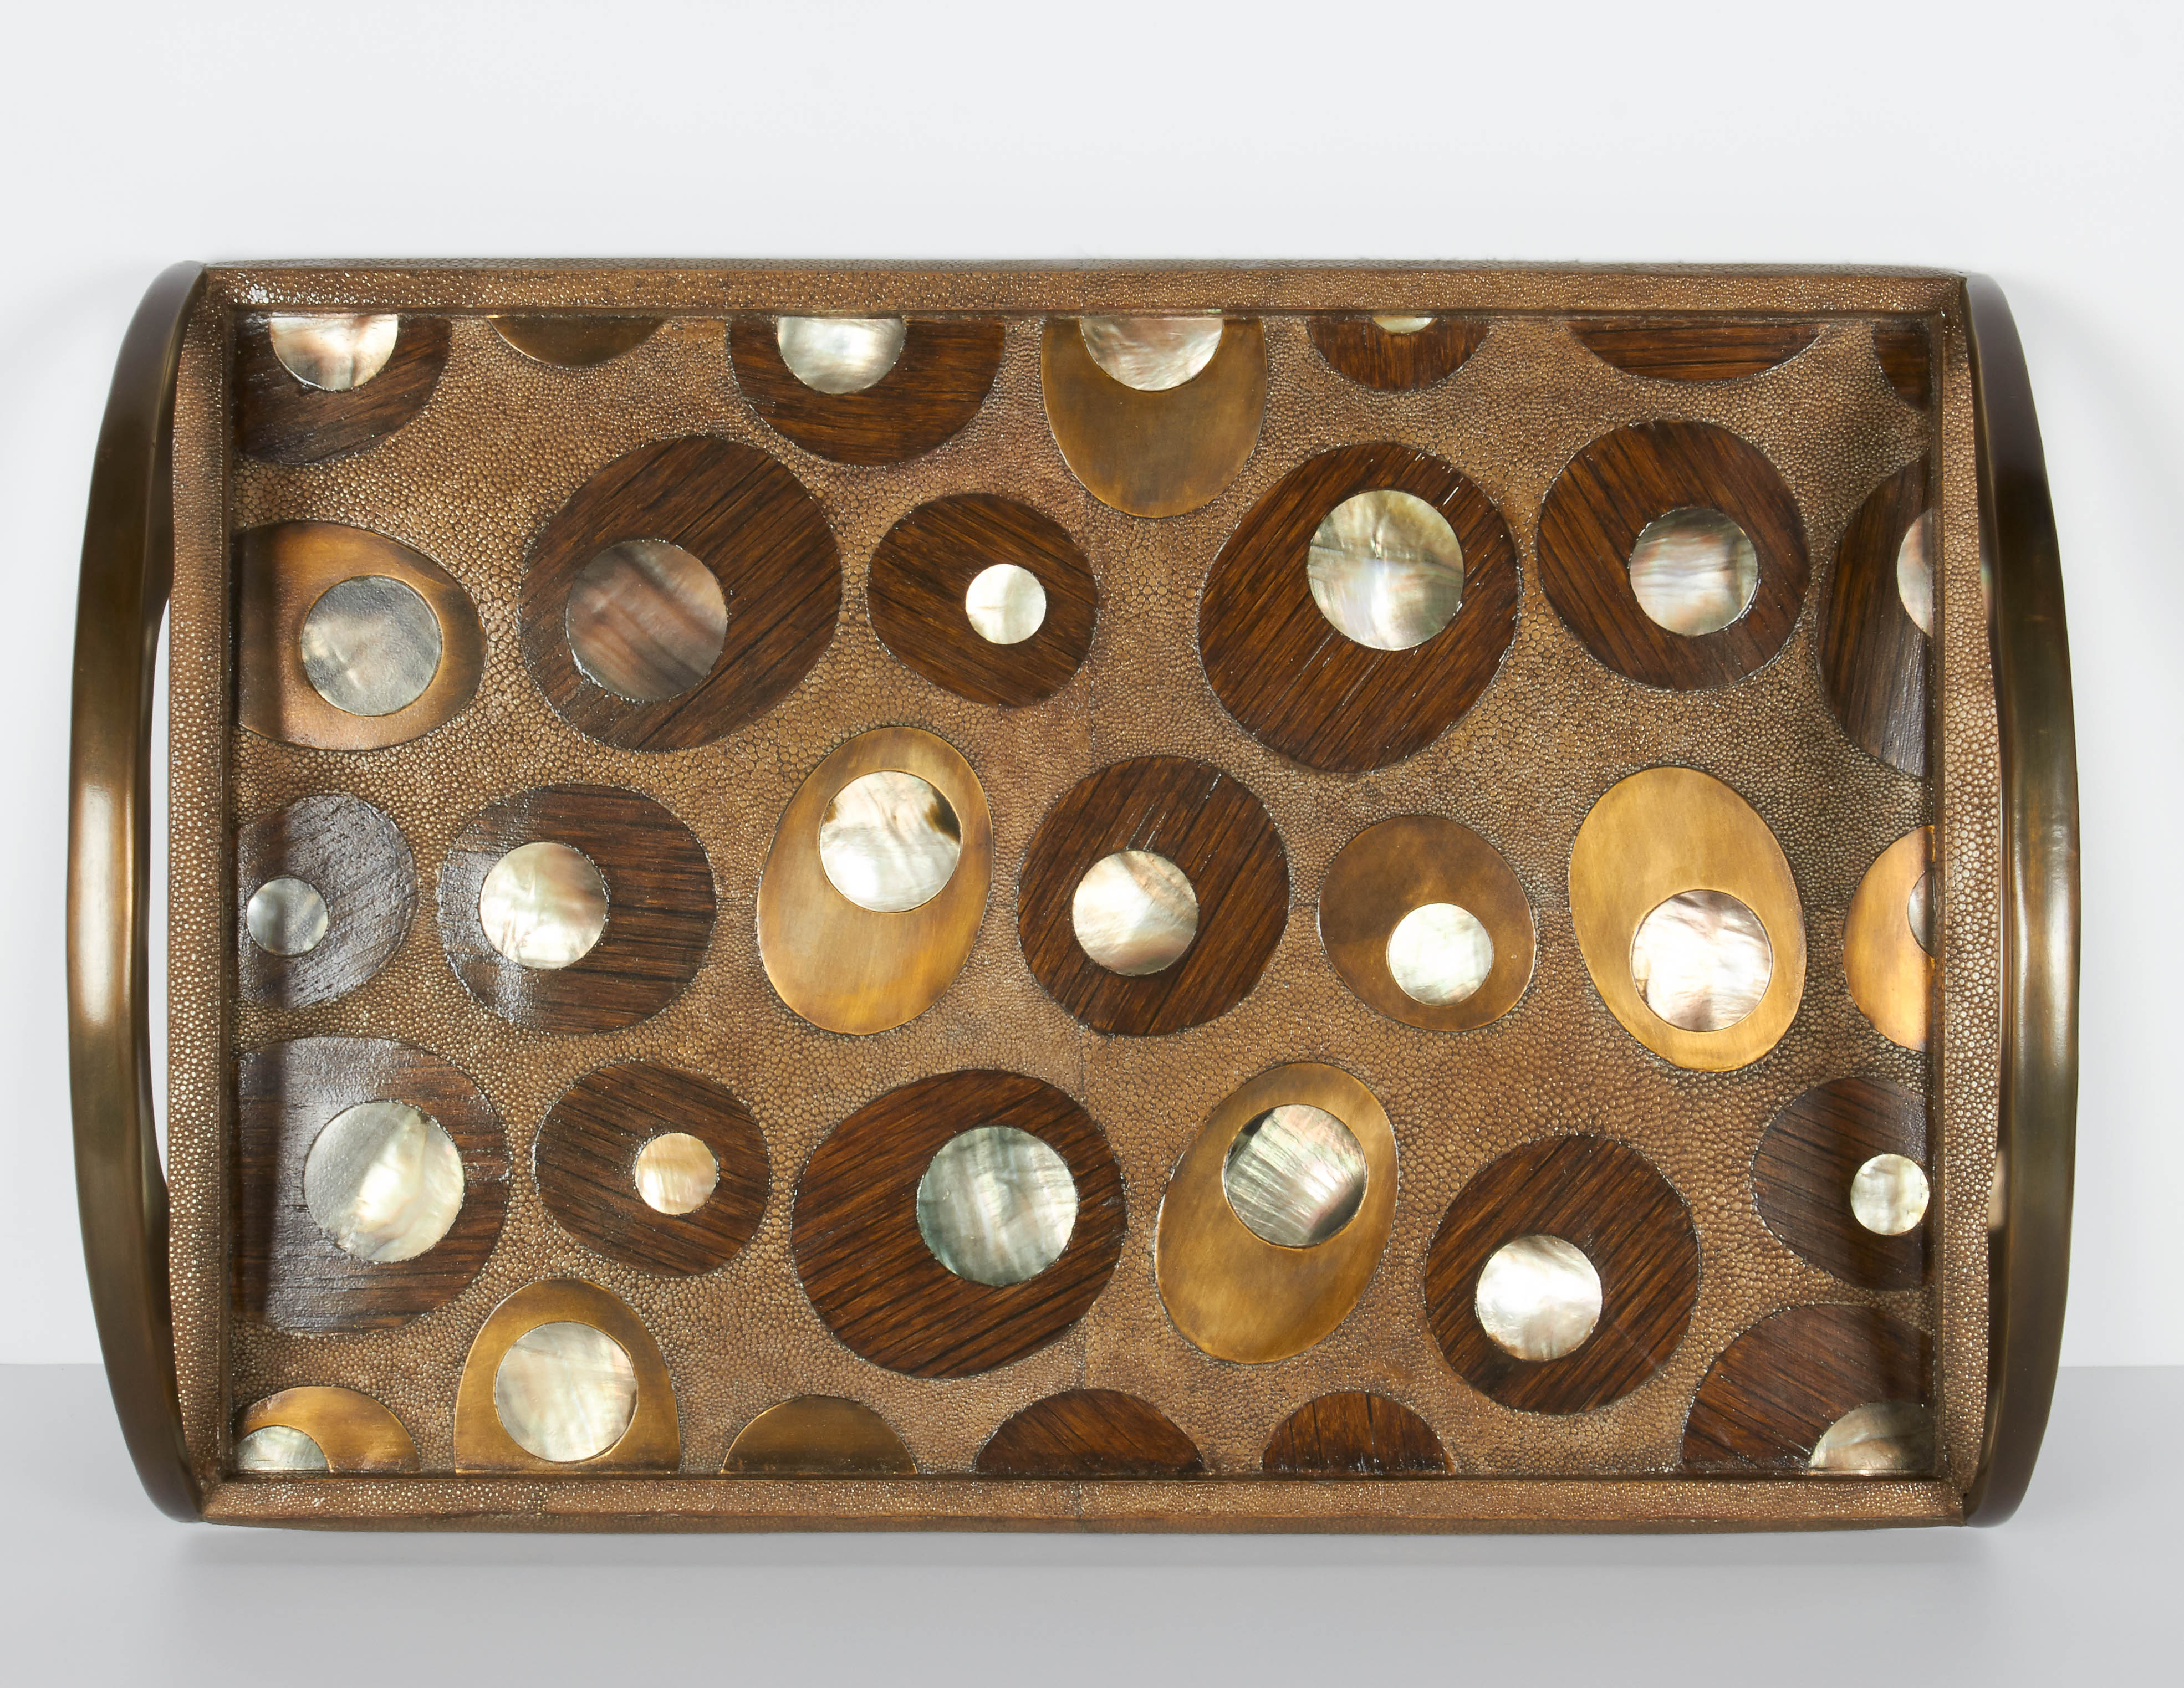 Contemporary Organic Modern Shagreen Tray with Mother of Pearl Inlays and Bronze Hardware